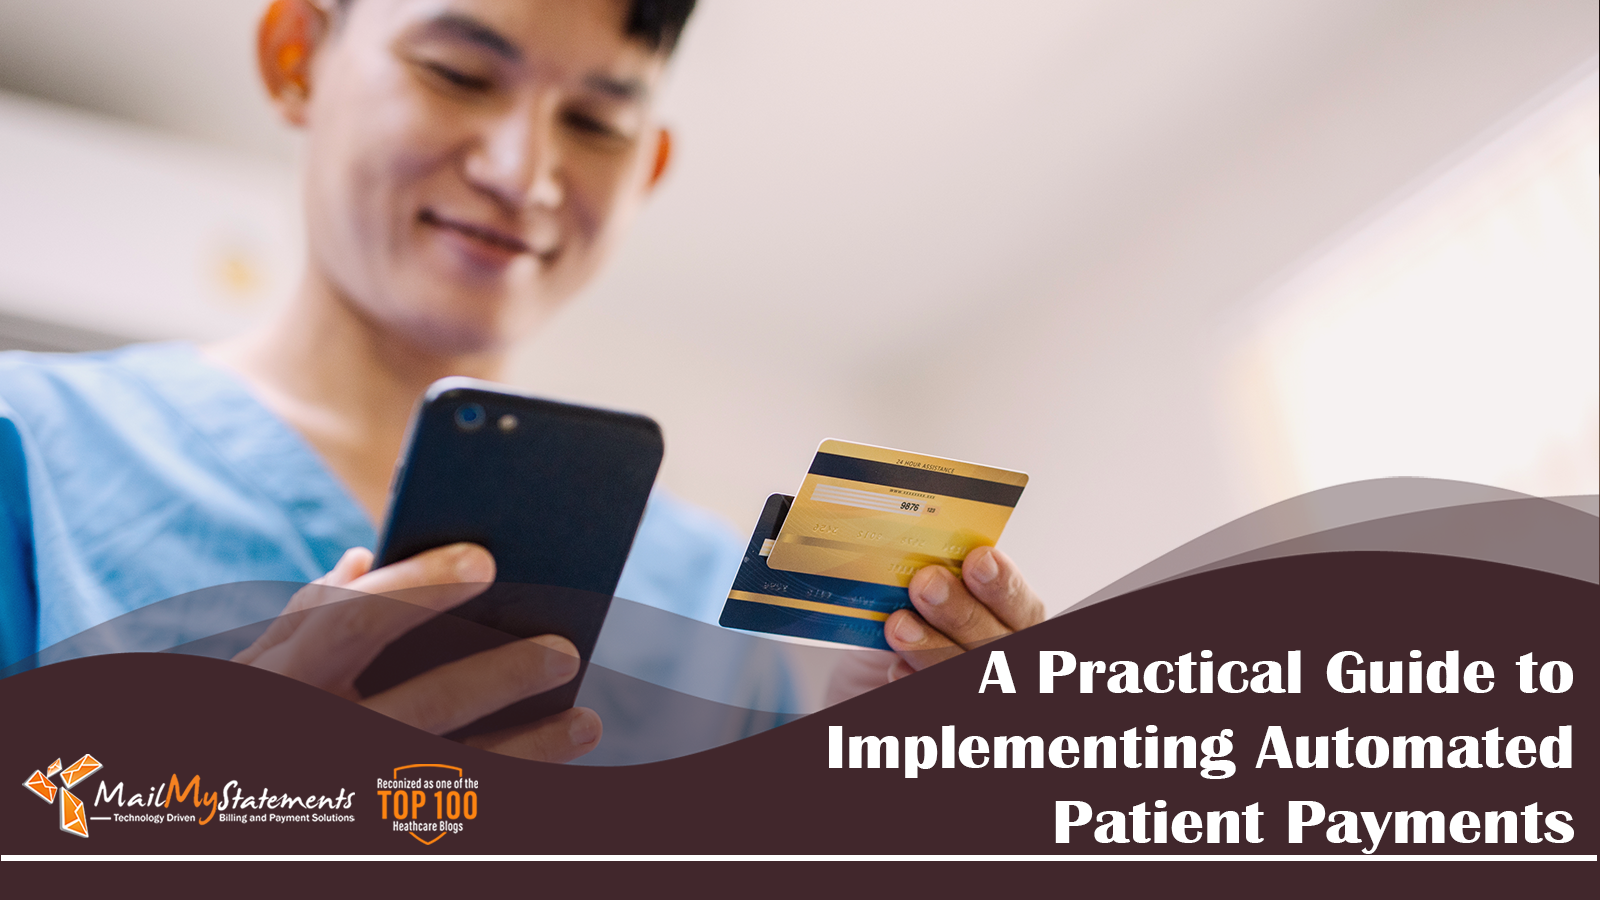 Ditch the Delinquencies - A Practical Guide to Implementing Automated Healthcare Payments